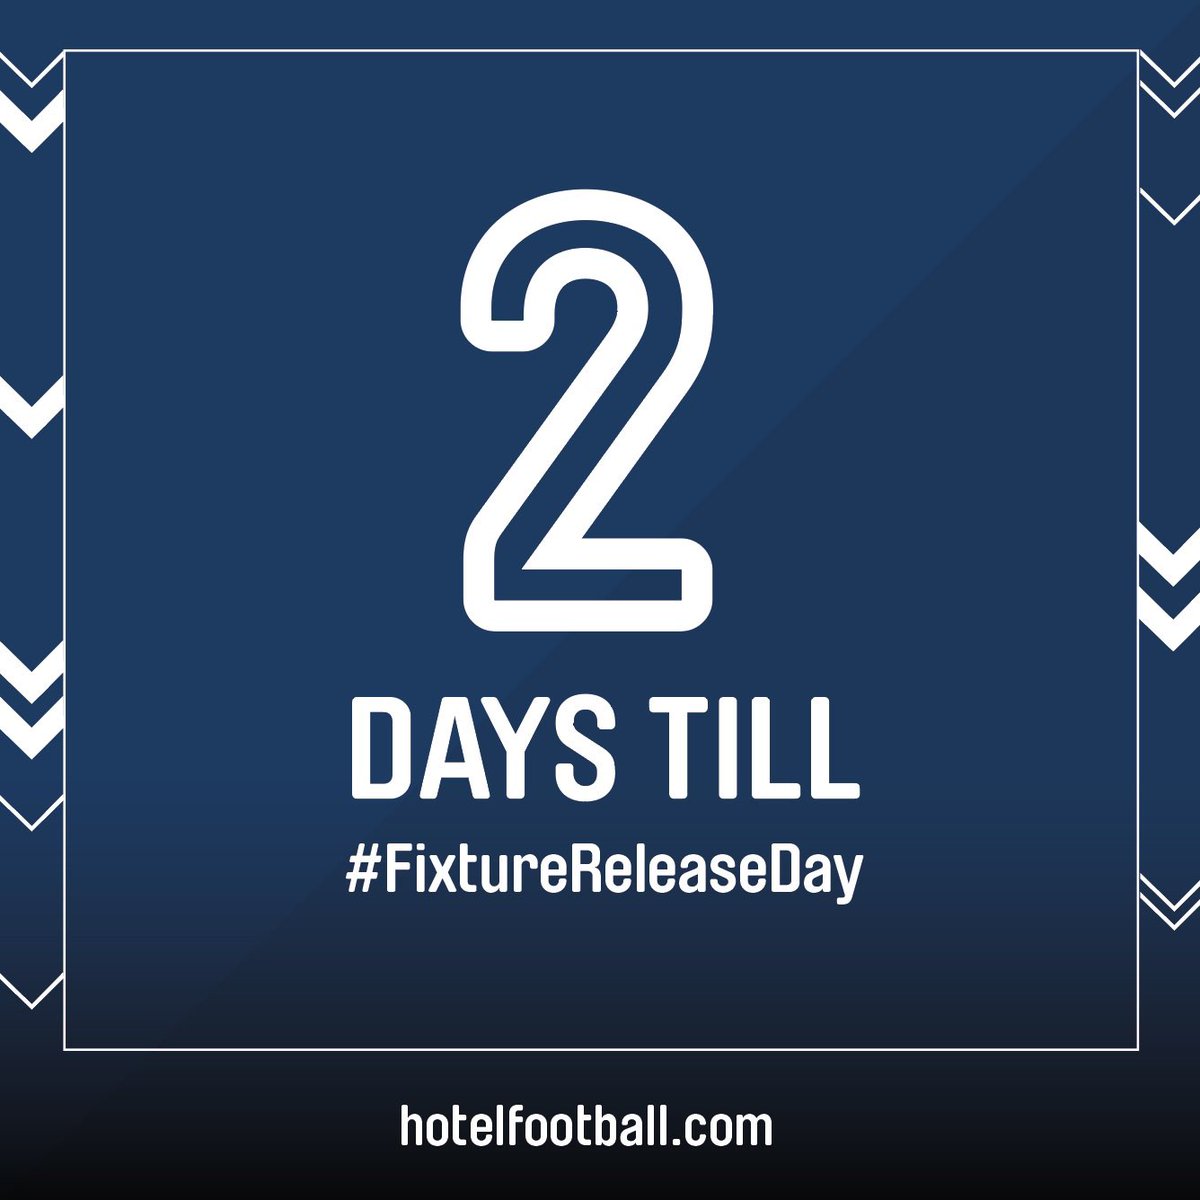 #FixtureReleaseDay Photo,#FixtureReleaseDay Photo by Hotel Football,Hotel Football on twitter tweets #FixtureReleaseDay Photo